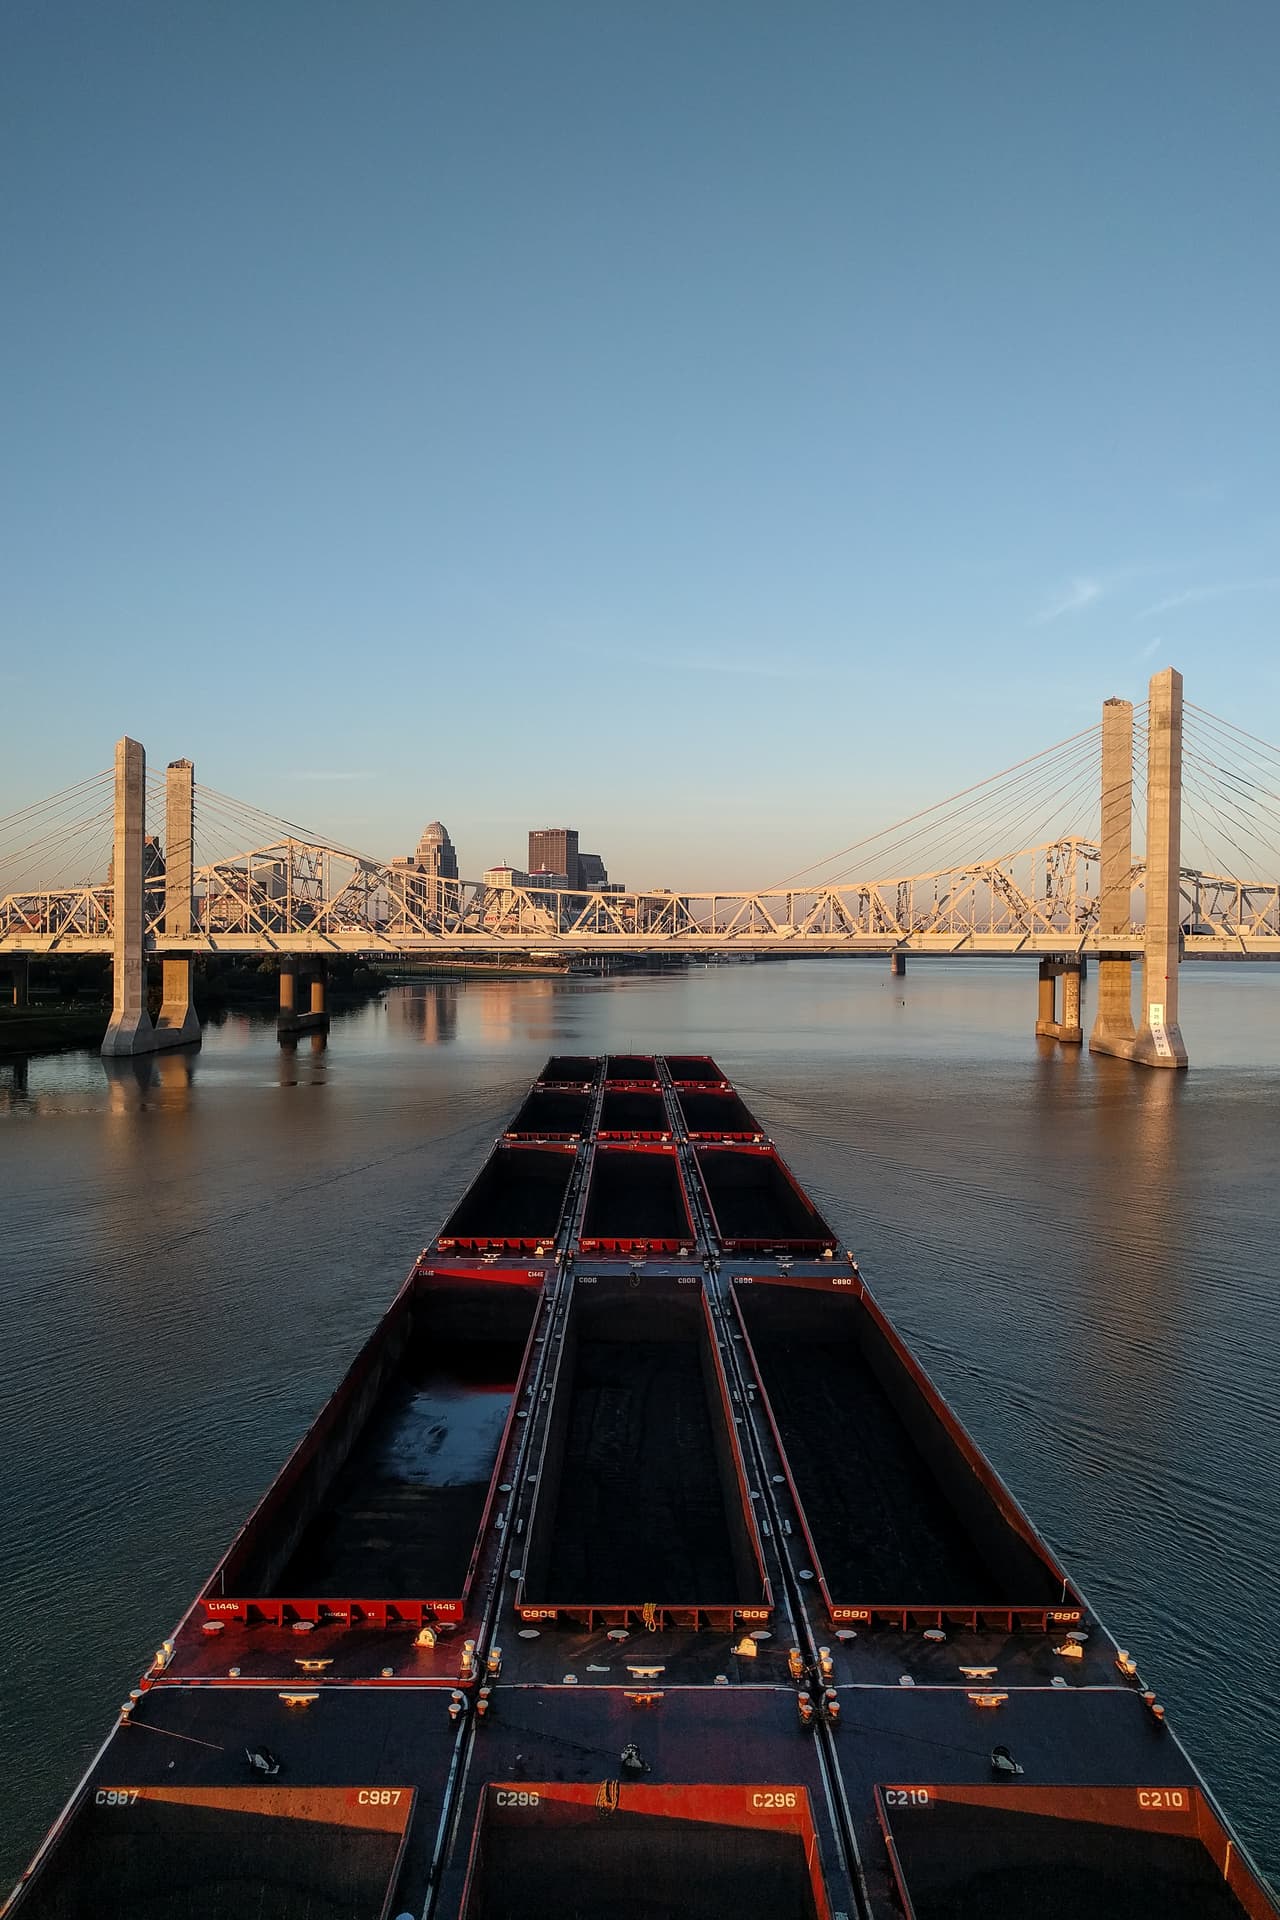 An empty coal barge approaches downtown Louisville on the Ohio River. In front of it, a brutalist suspension bridge of white steel and concrete pylons.